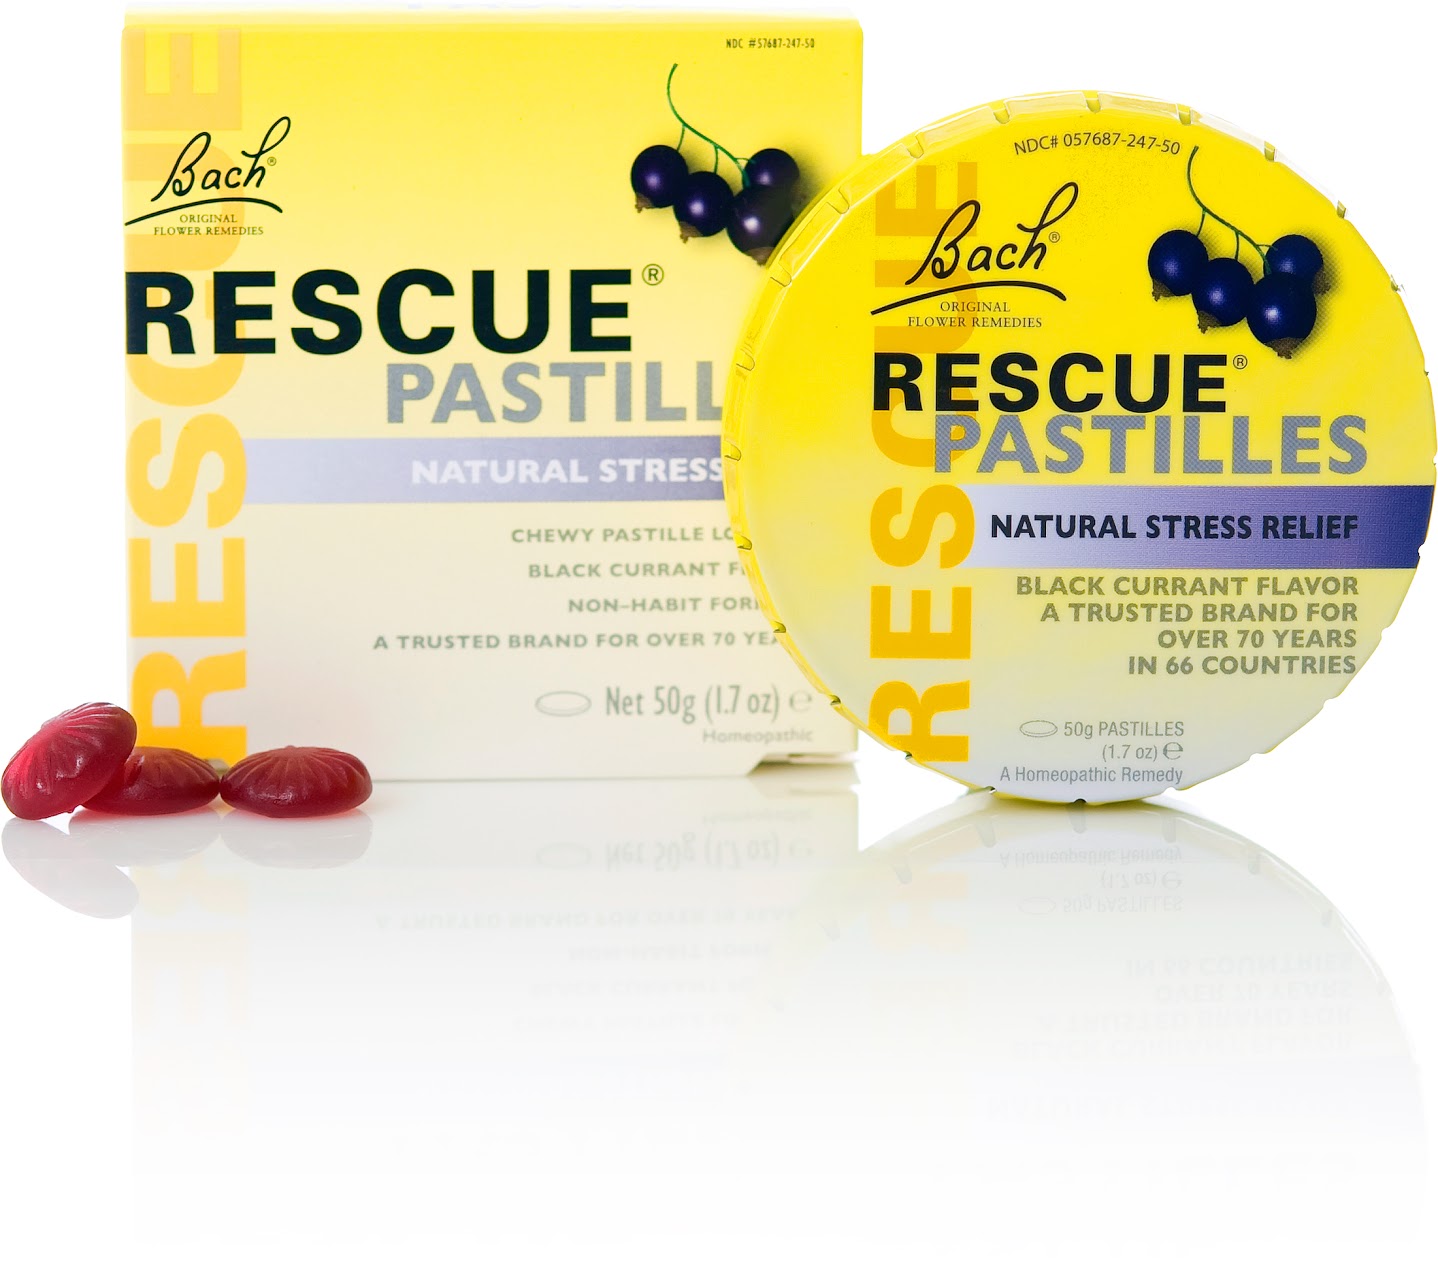 RESCUE: A Natural Way to Relieve Stress